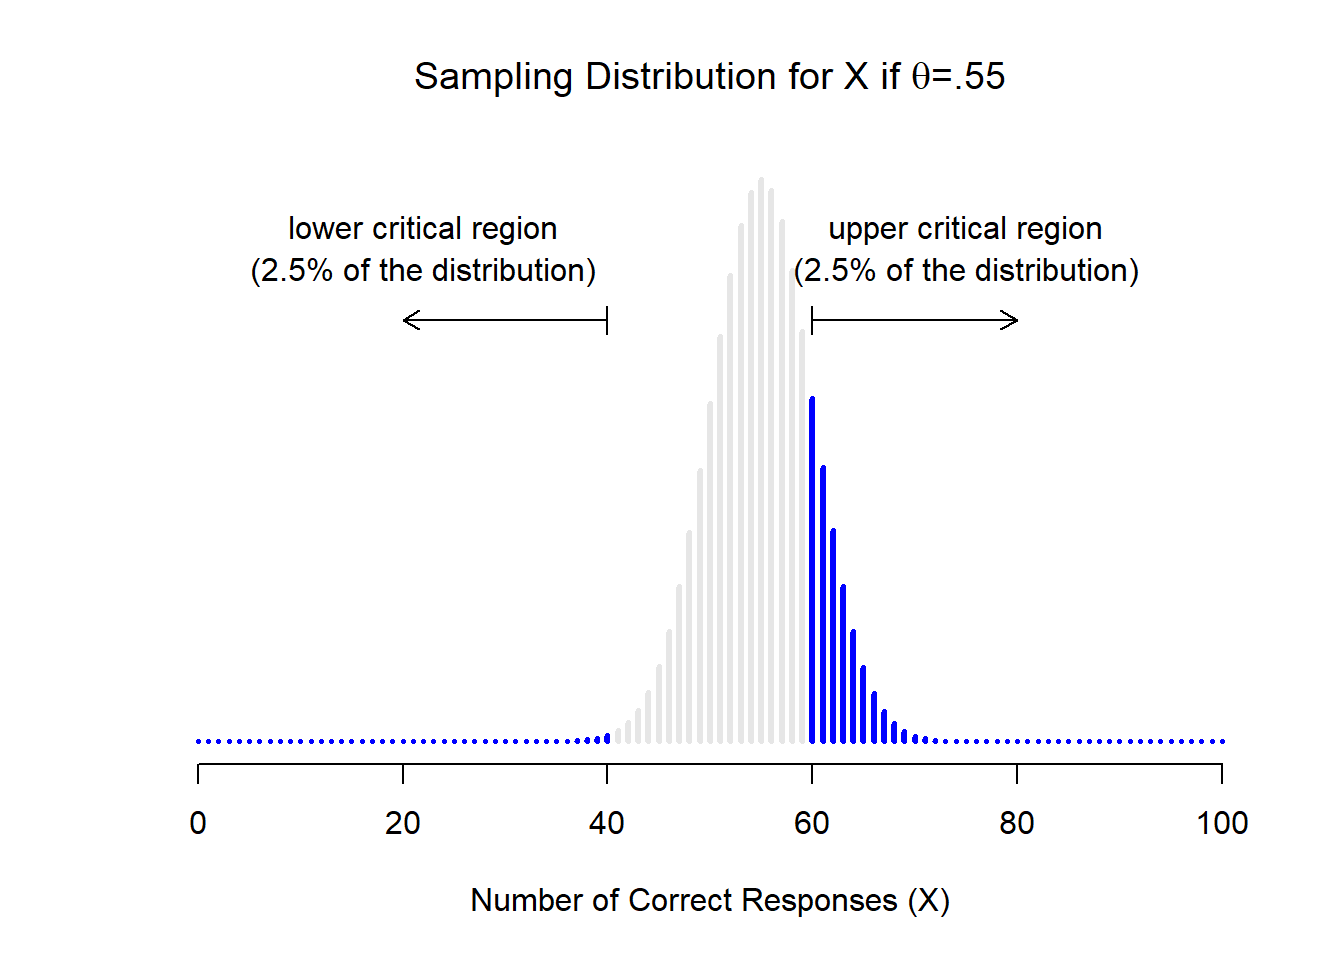 Sampling distribution under the *alternative* hypothesis, for a population parameter value of $\theta = 0.55$. A reasonable proportion of the distribution lies in the rejection region.